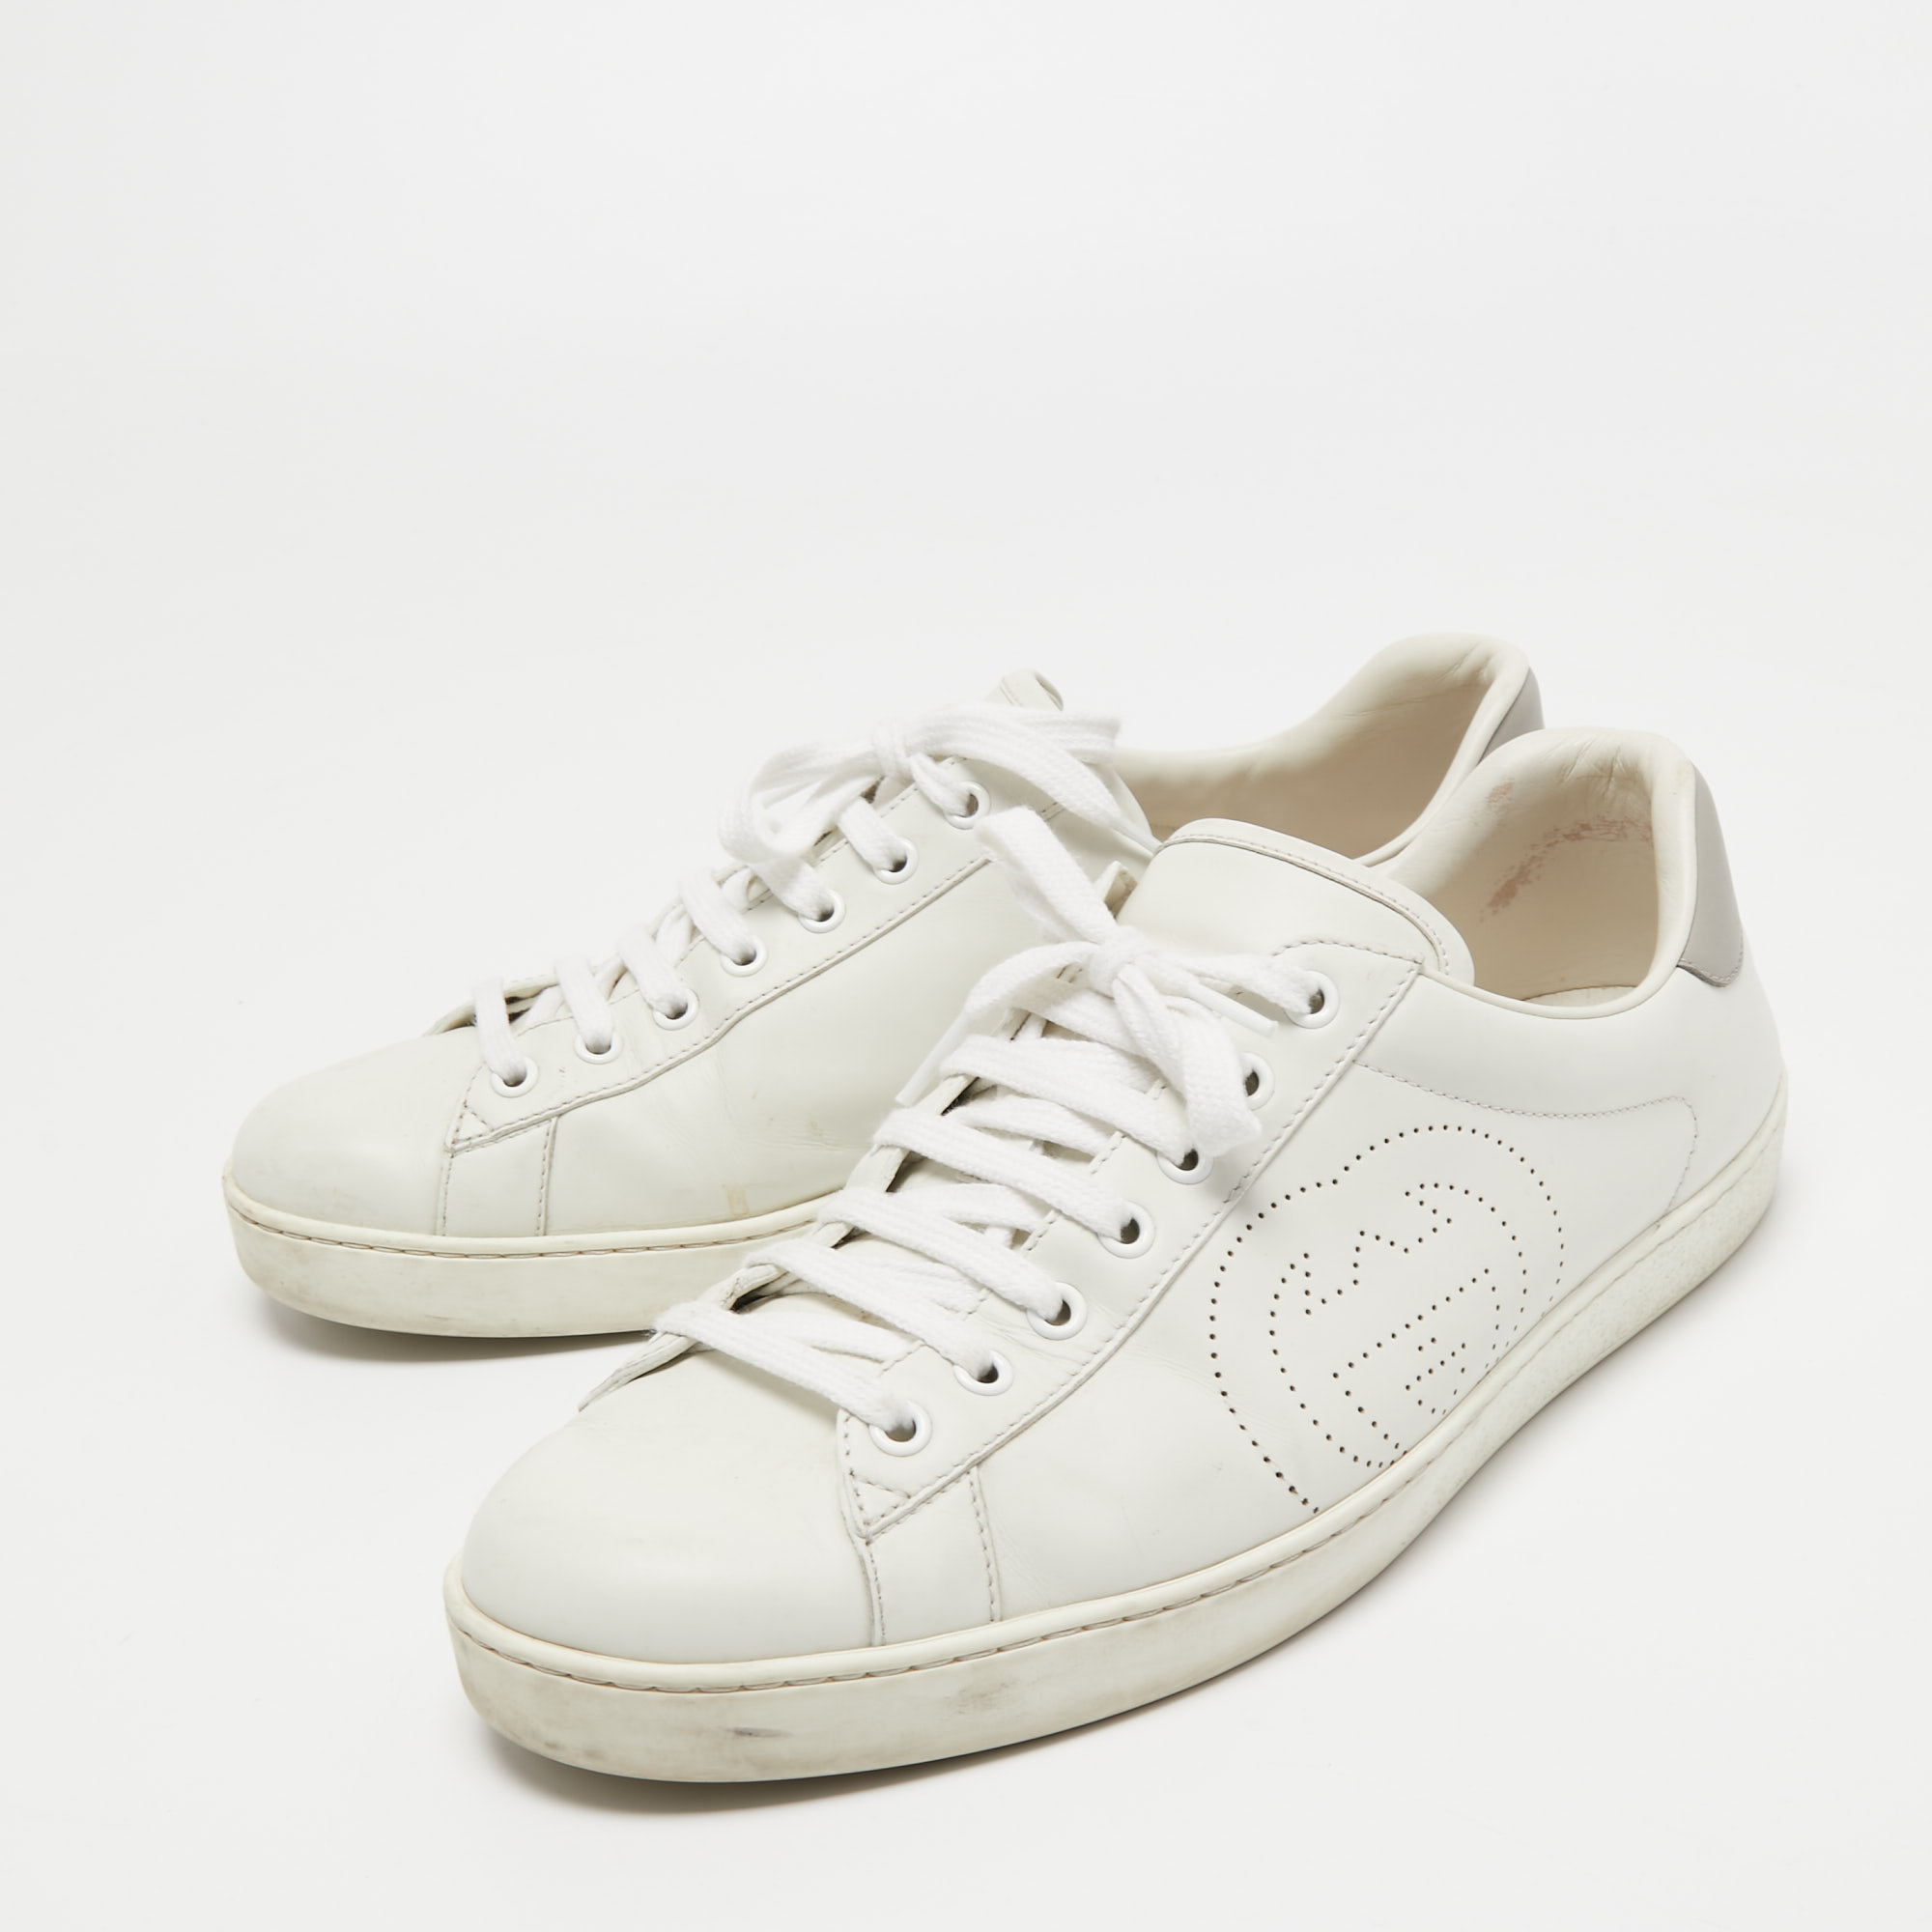 

Gucci White Perforated Interlocking G Leather Ace Sneakers Size